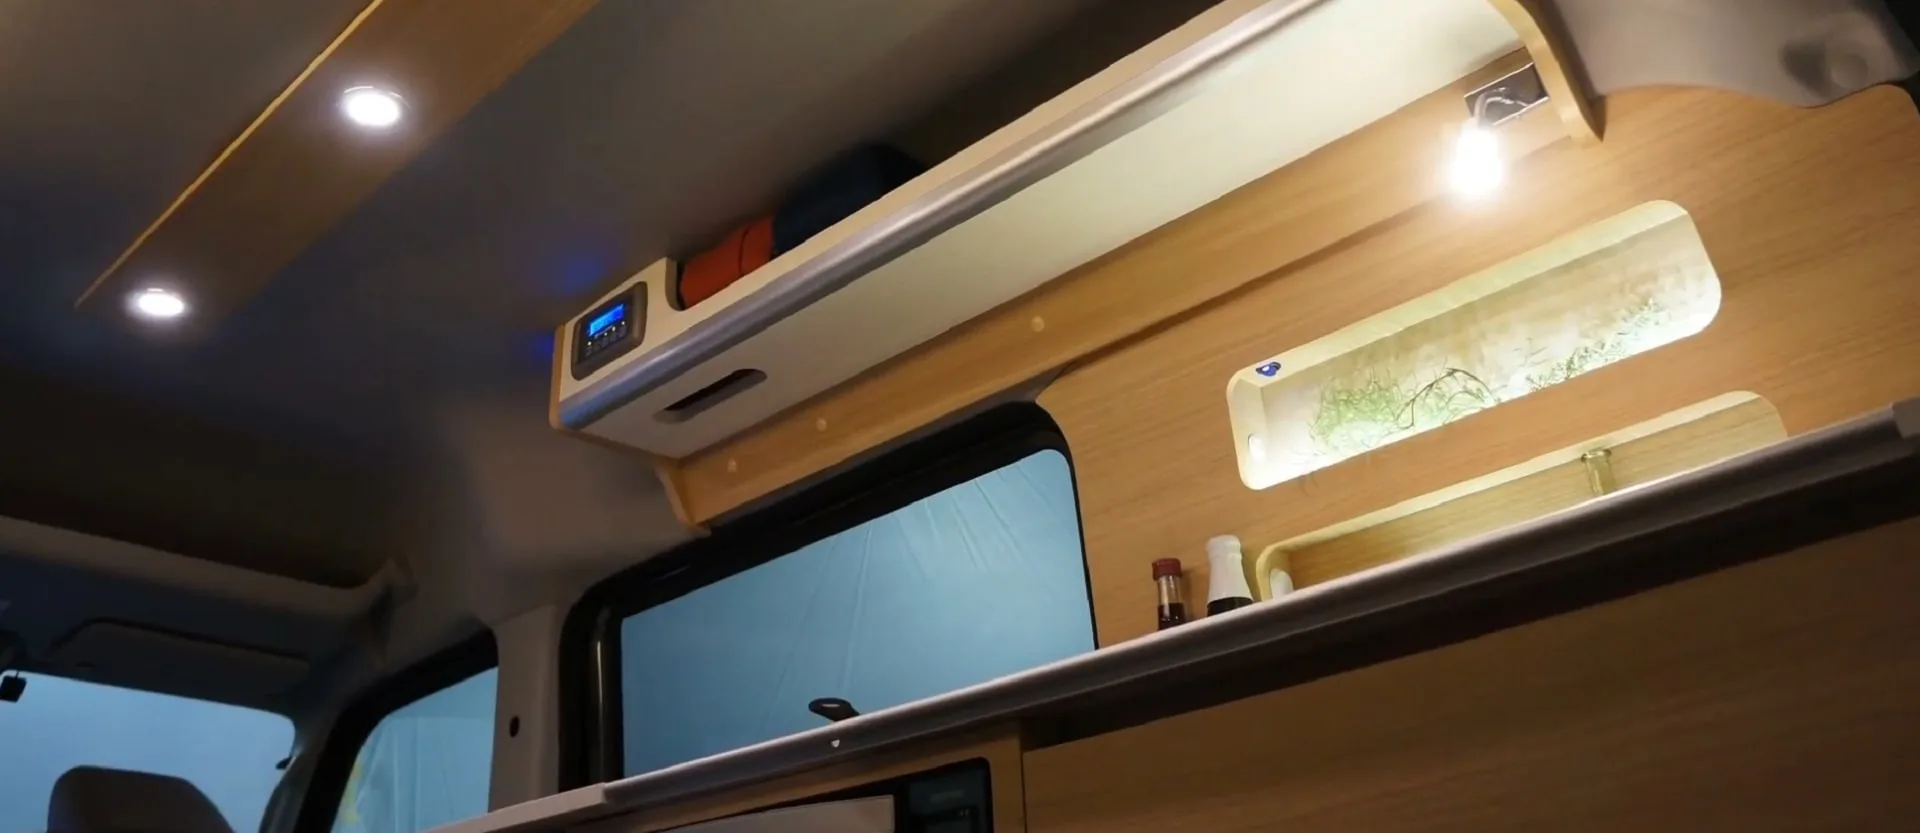 Photo of the lights and electronics in the Miniature Cruise Cozy, one of the smallest camper vans